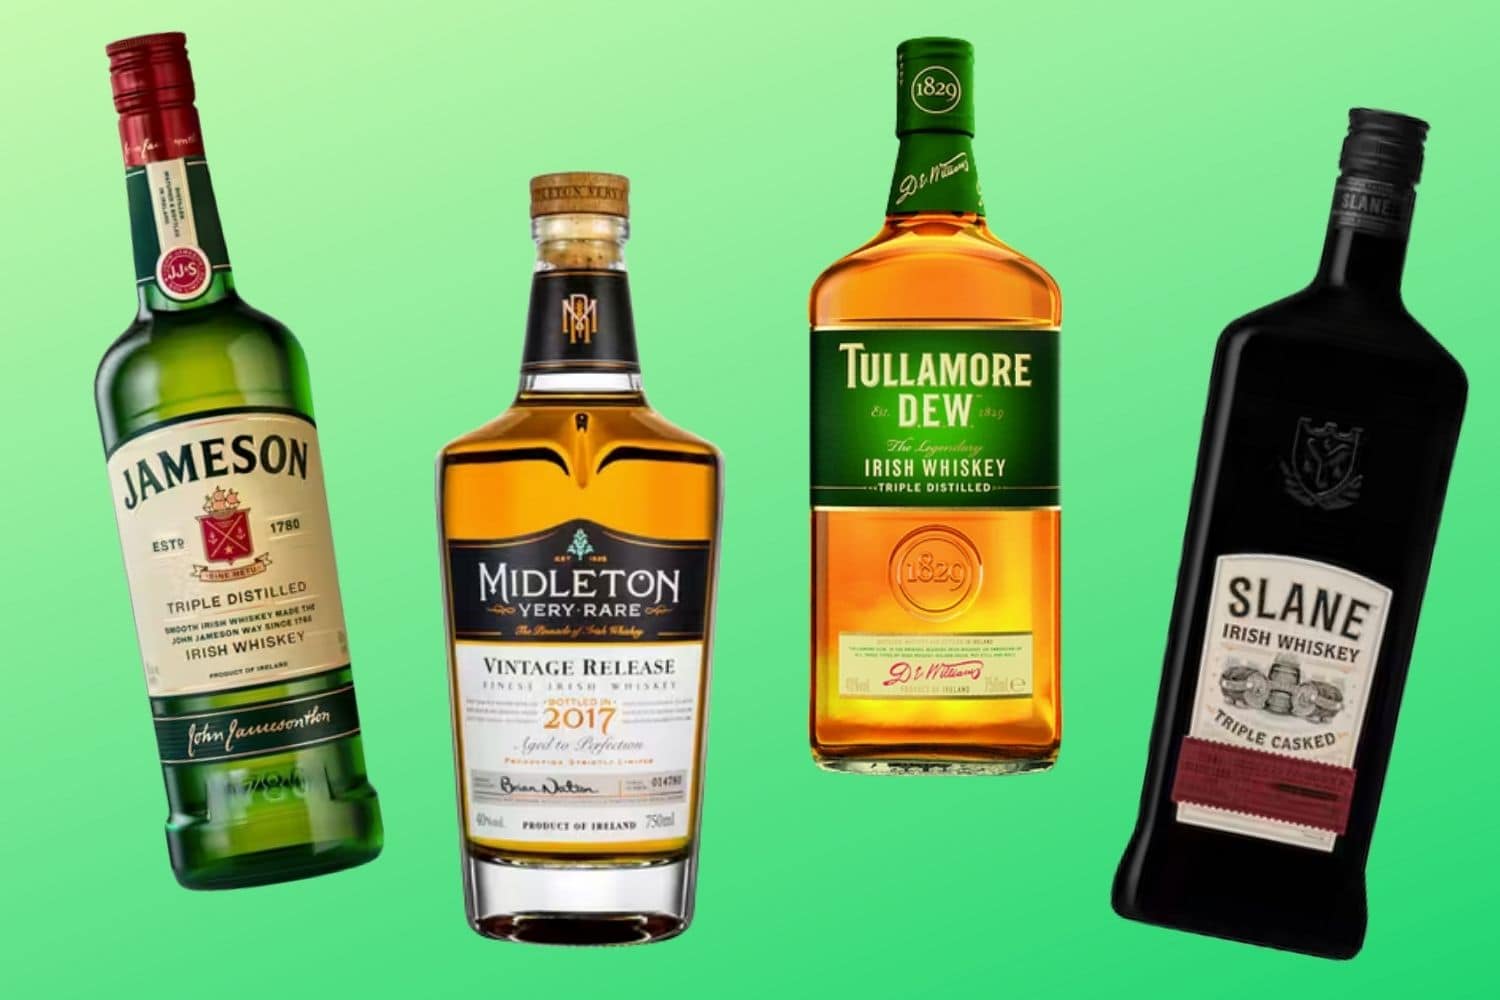 14 Irish Whiskey Brands Ranked from Worst to Best - Let's Eat